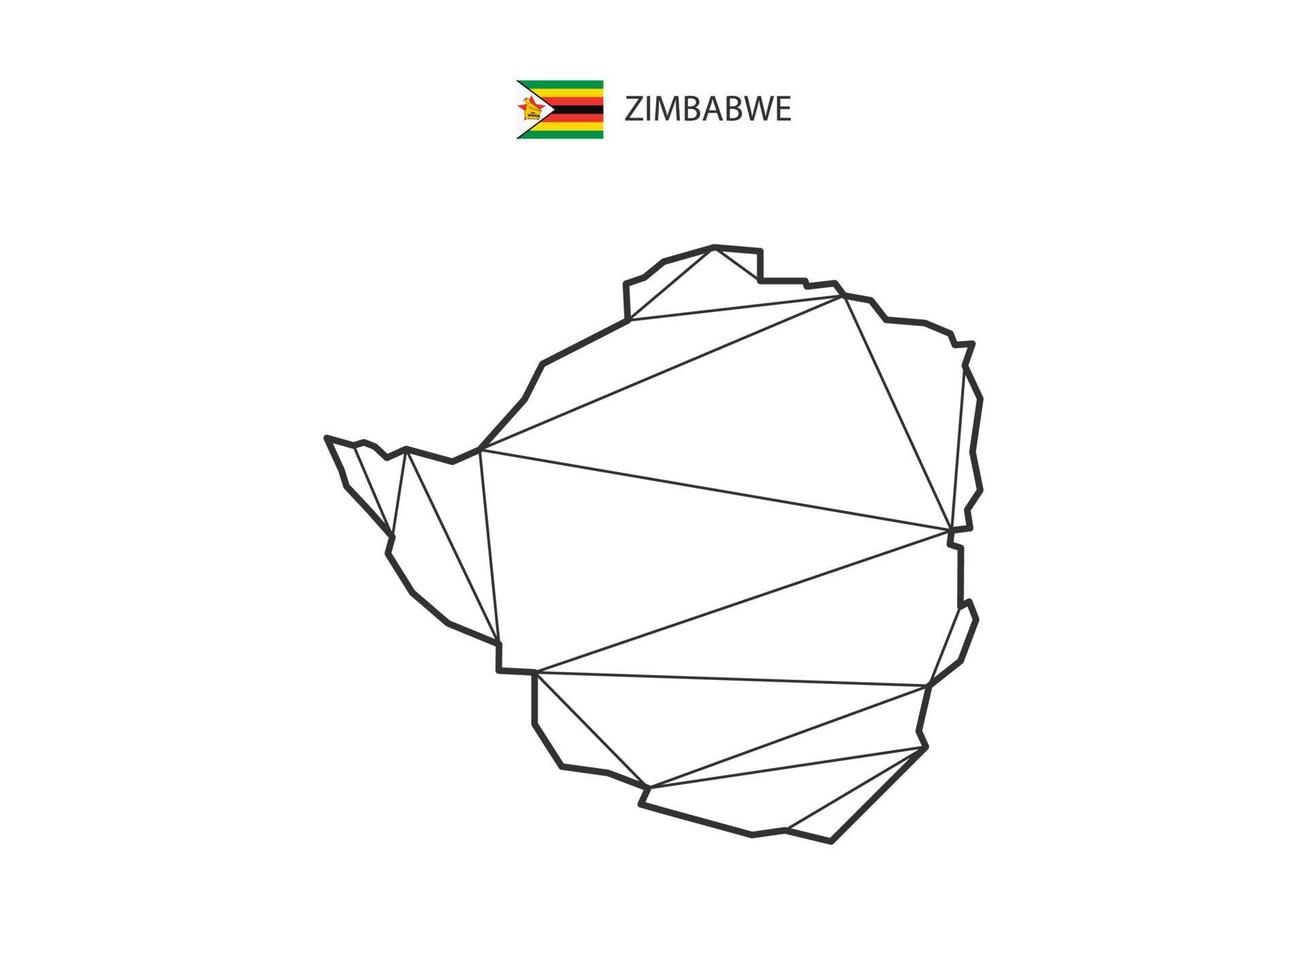 Mosaic triangles map style of Zimbabwe isolated on a white background. Abstract design for vector. vector